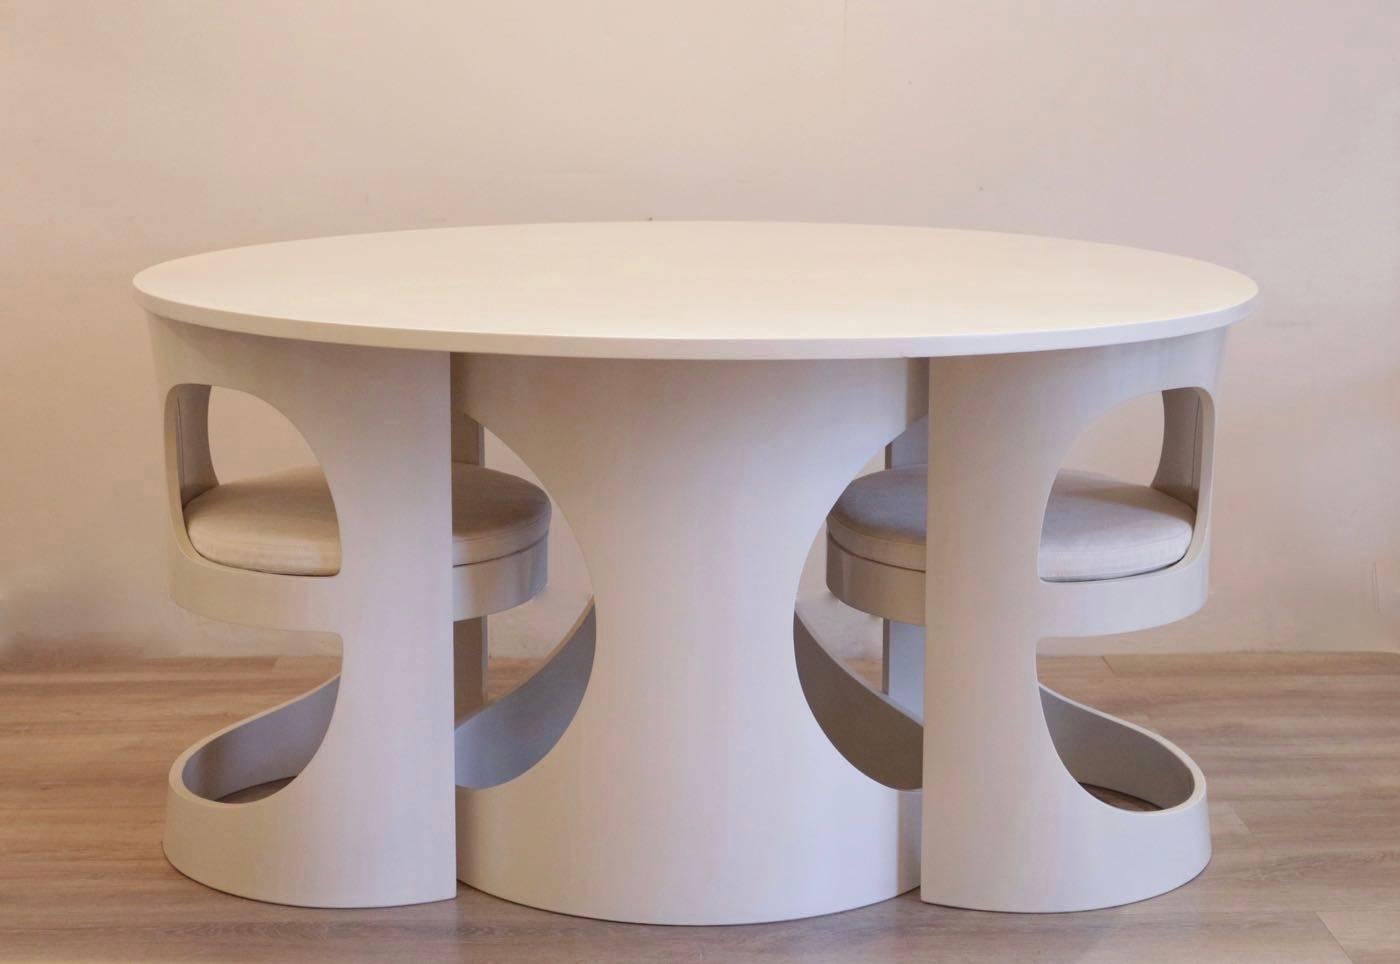 Arne Jacobsen white lacquered pre pop dining set for Asko, 1969.

Rare dining room suite consisting of one round table with four matching chairs. Design in 1969 by Arne Jacobsen, this suite is one of his last creation. Made of white lacquered birch